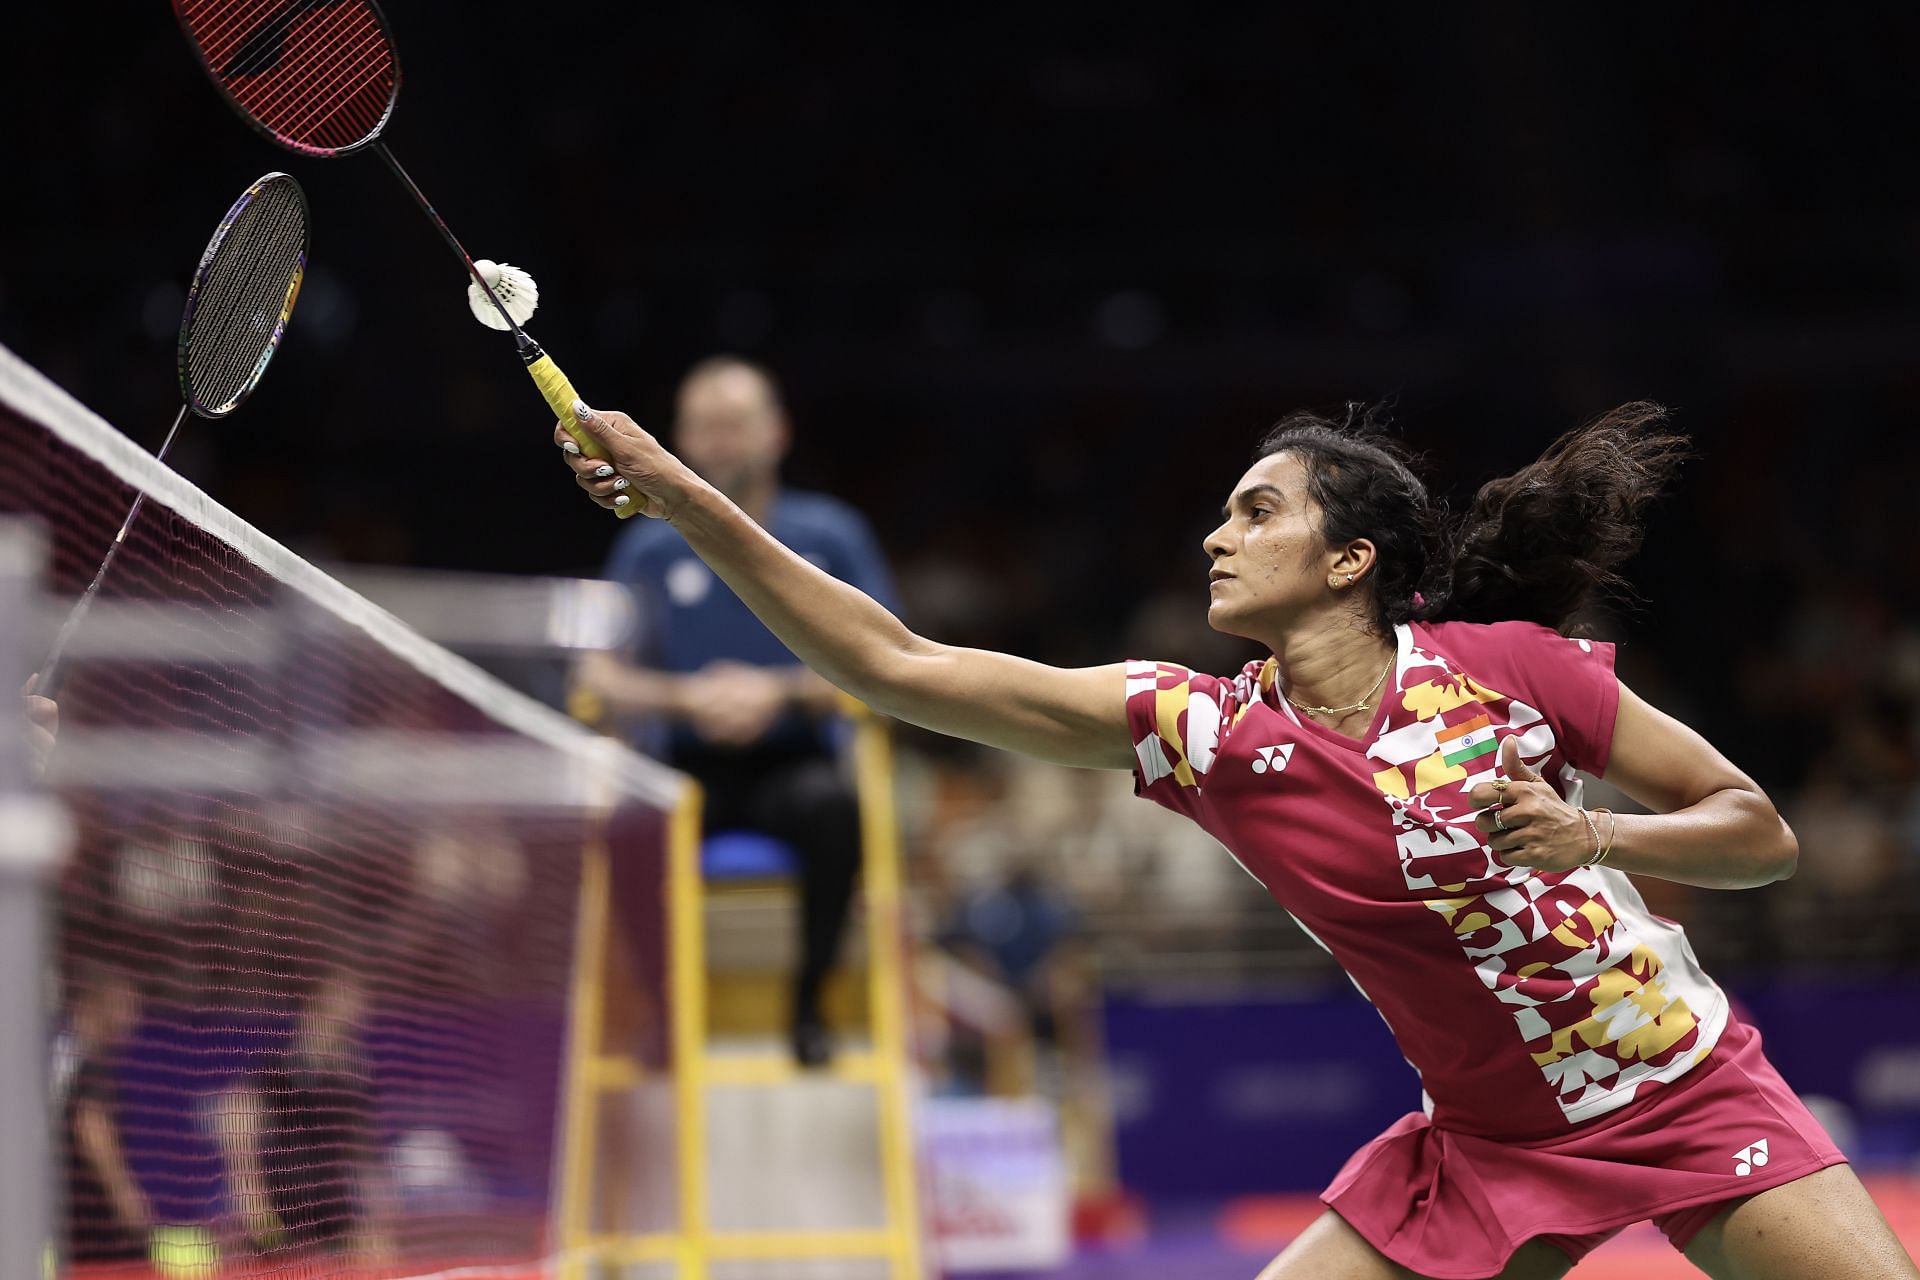 Canada Open 2023 PV Sindhu vs Natsuki Nidaira, head-to-head, prediction, where to watch and live streaming details